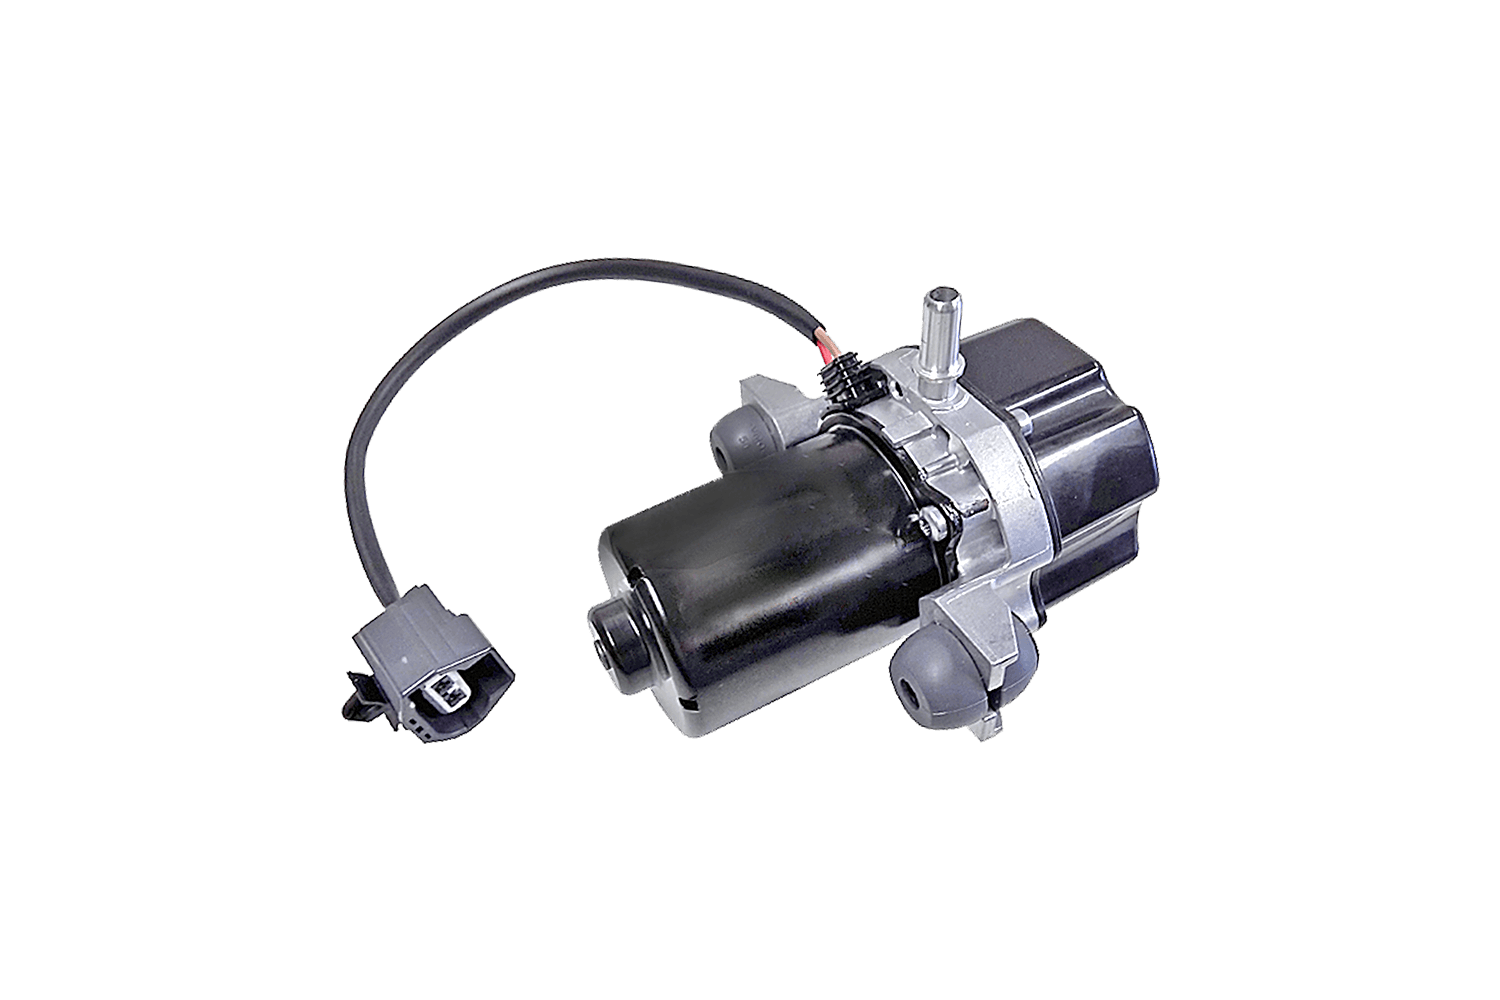 Vacuum pumps UP 5.0 and UP 28 and pressure sensors from Hella offered by Patlon